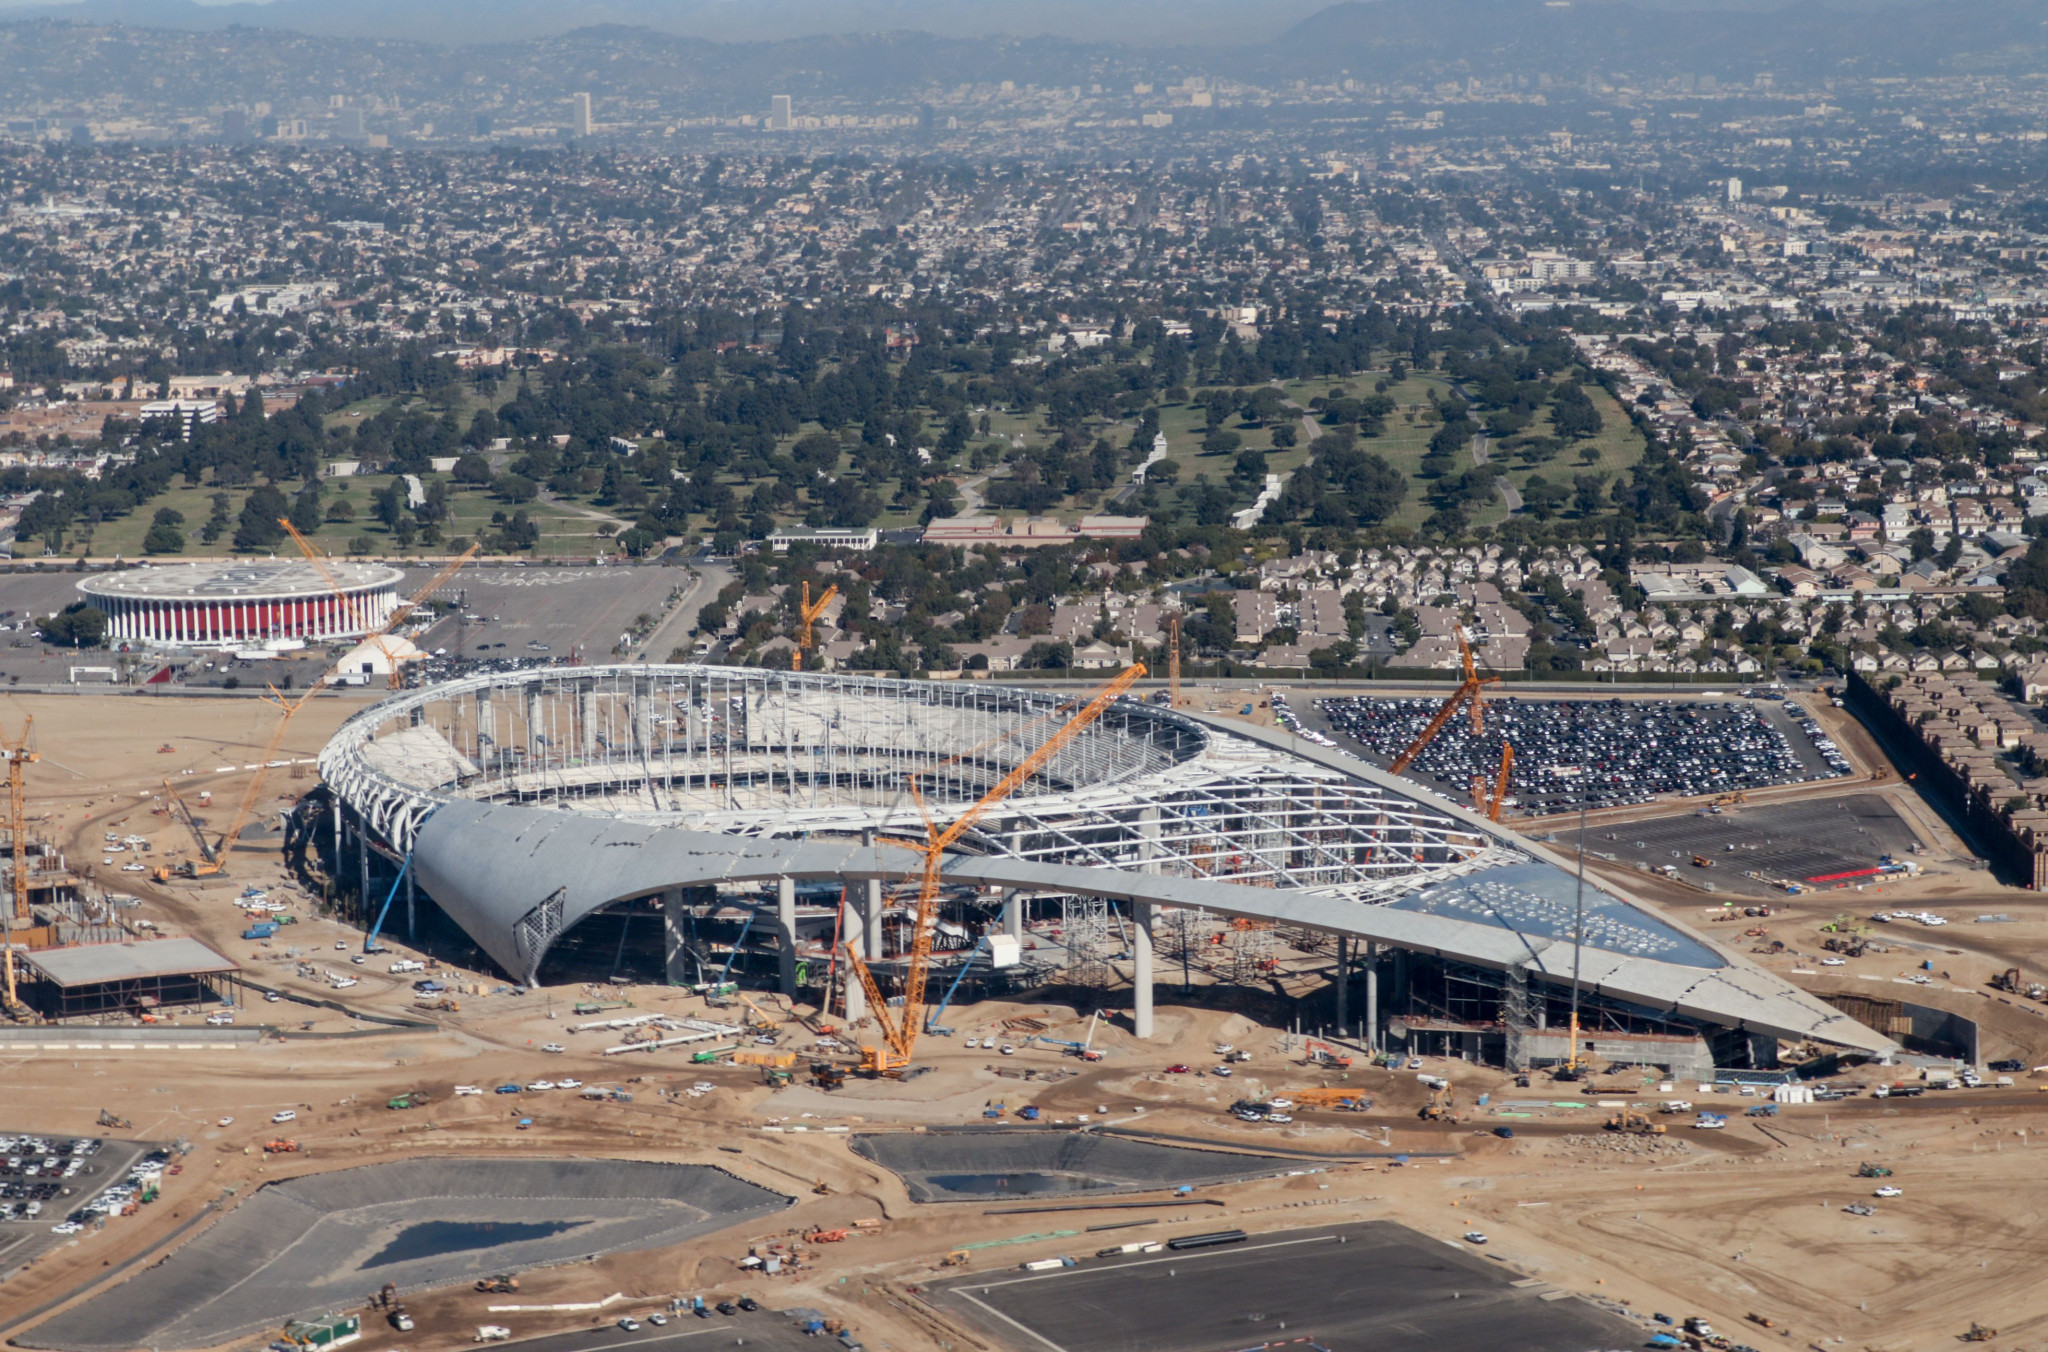 Los Angeles 2028 Opening and Closing Ceremony stadium rated at 85 per cent complete